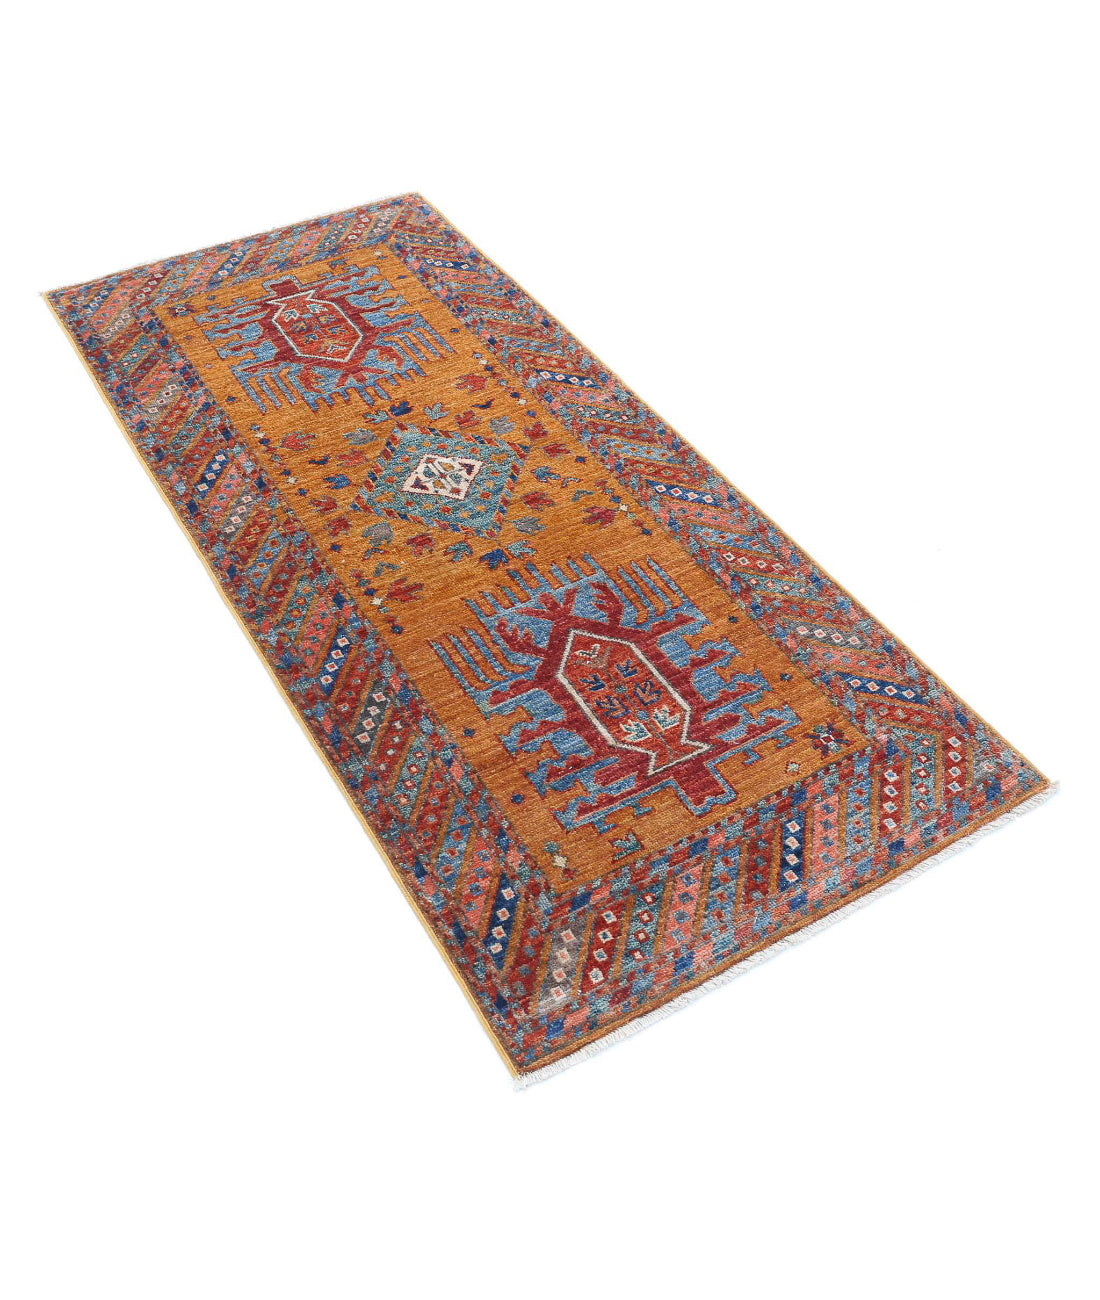 Hand Knotted Nomadic Caucasian Humna Wool Rug - 2'8'' x 5'9'' 2'8'' x 5'9'' (80 X 173) / Gold / Multi